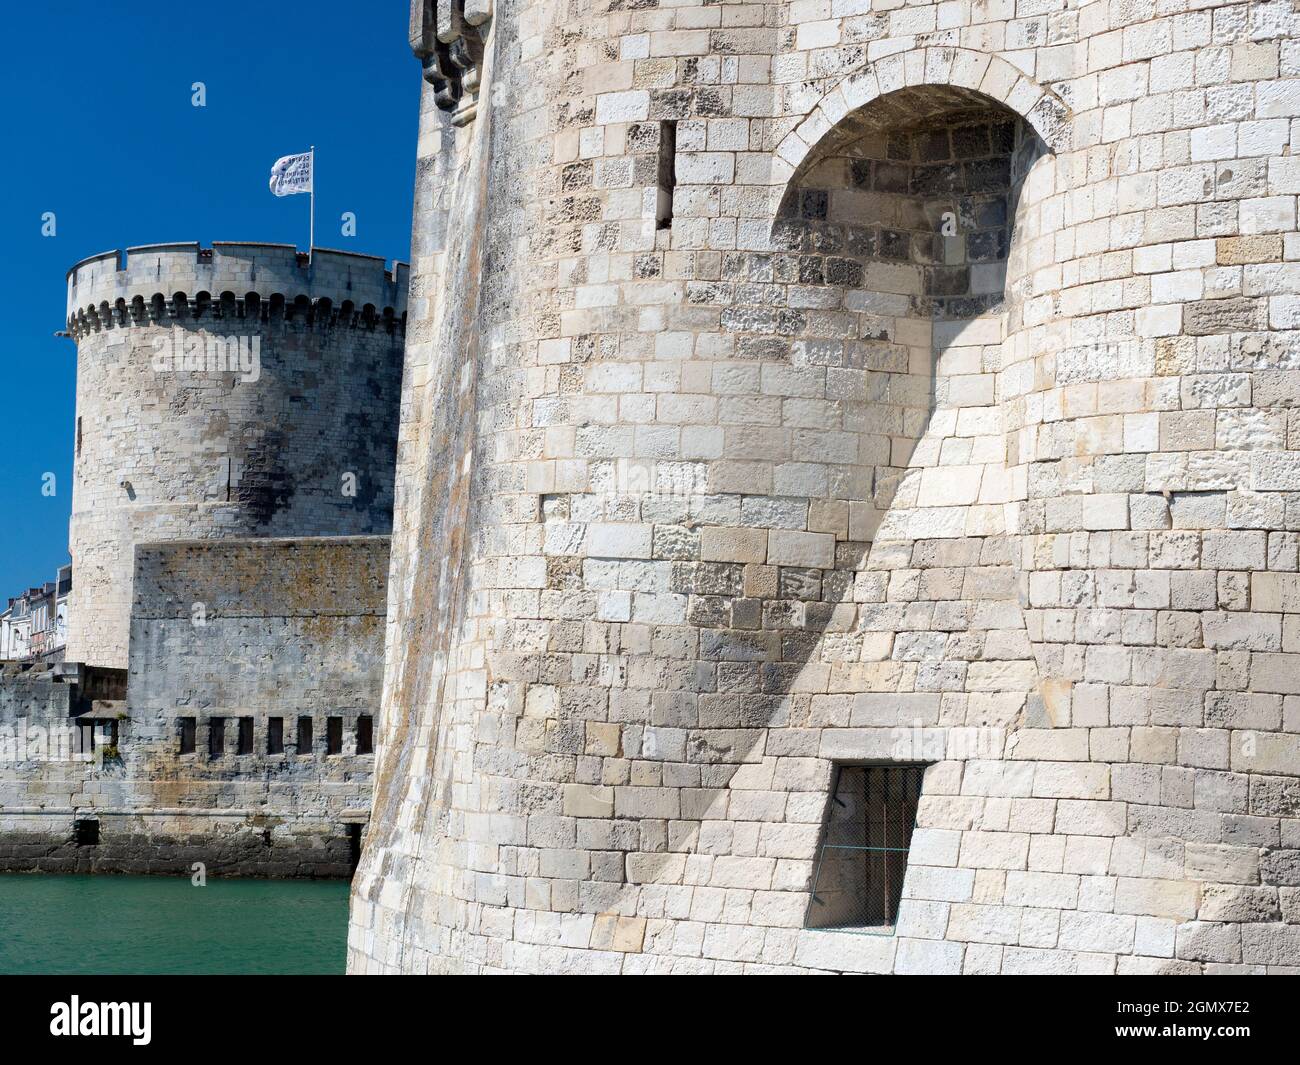 La Rochelle, France - 20 June 2013; no people in view. Founded in the 10th Century, La Rochelle is a historic coastal town and harbour on the west coa Stock Photo